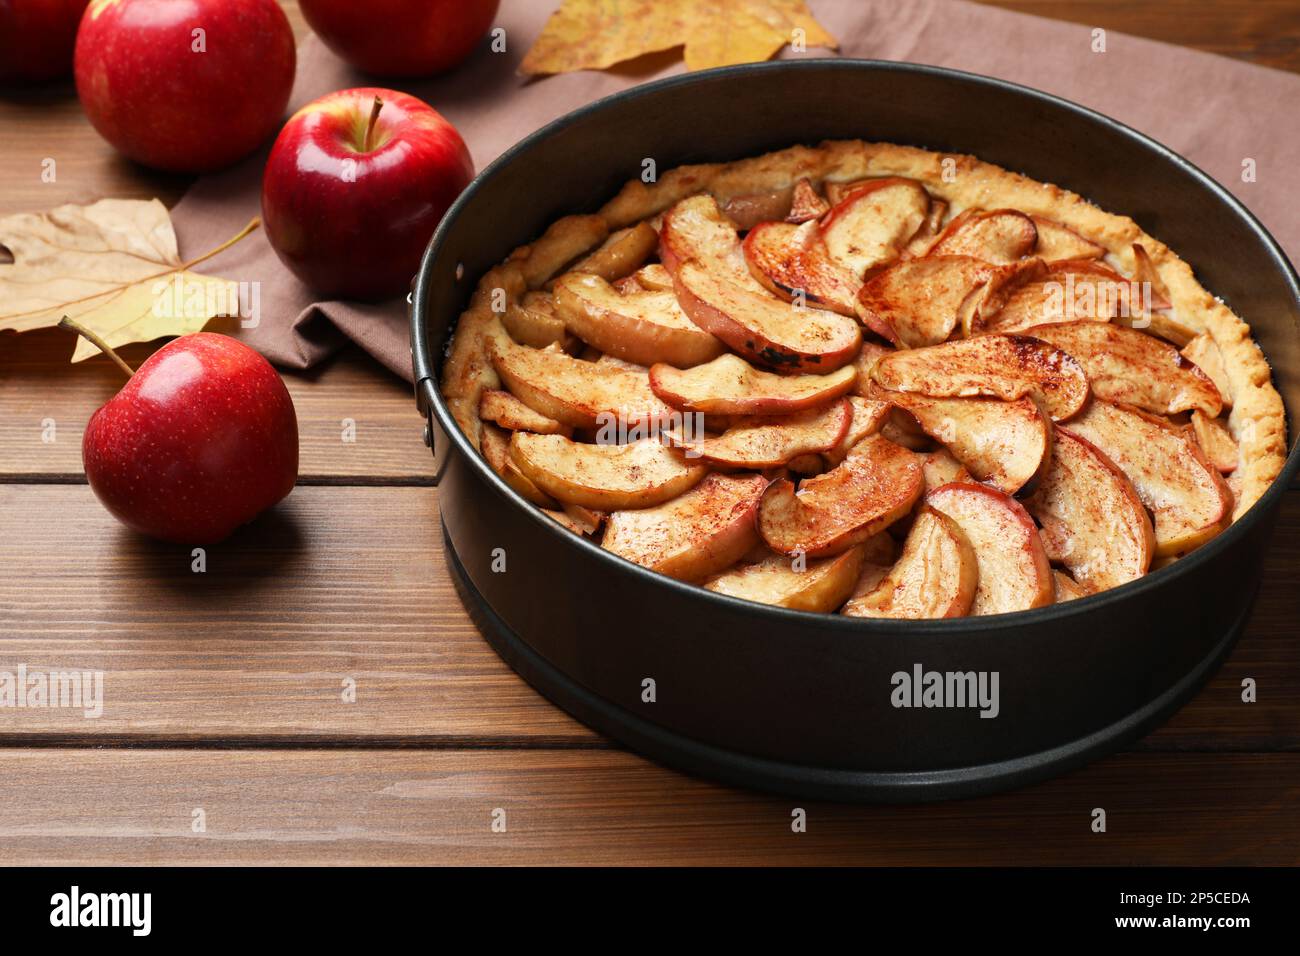 Delicious apple pie and fresh fruits on wooden table Stock Photo